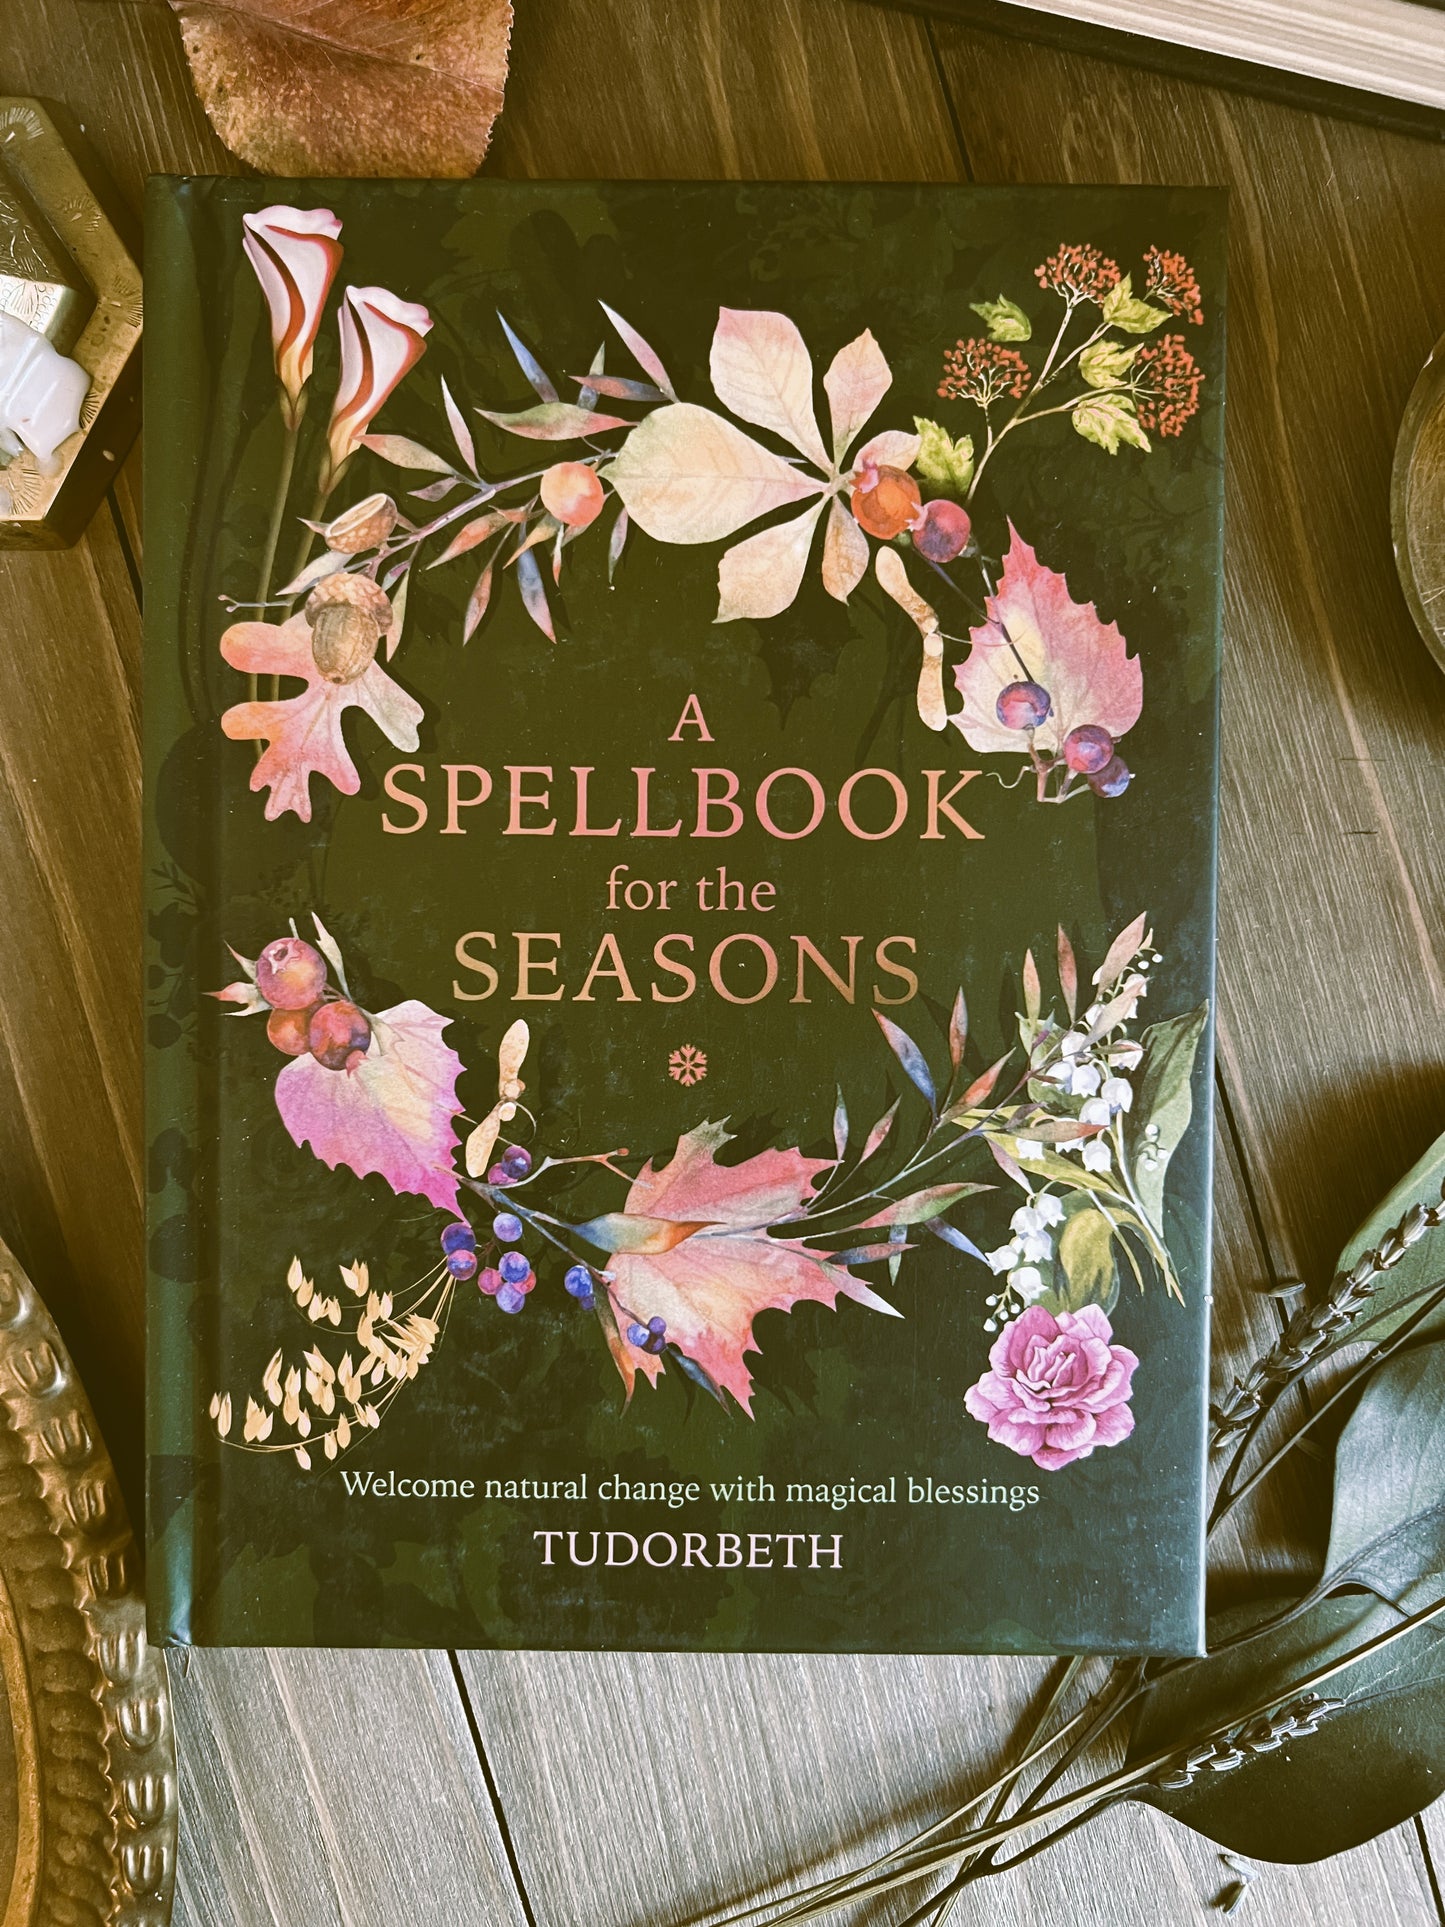 A Spellbook for the Seasons (Hardcover, Full Color Illust.)